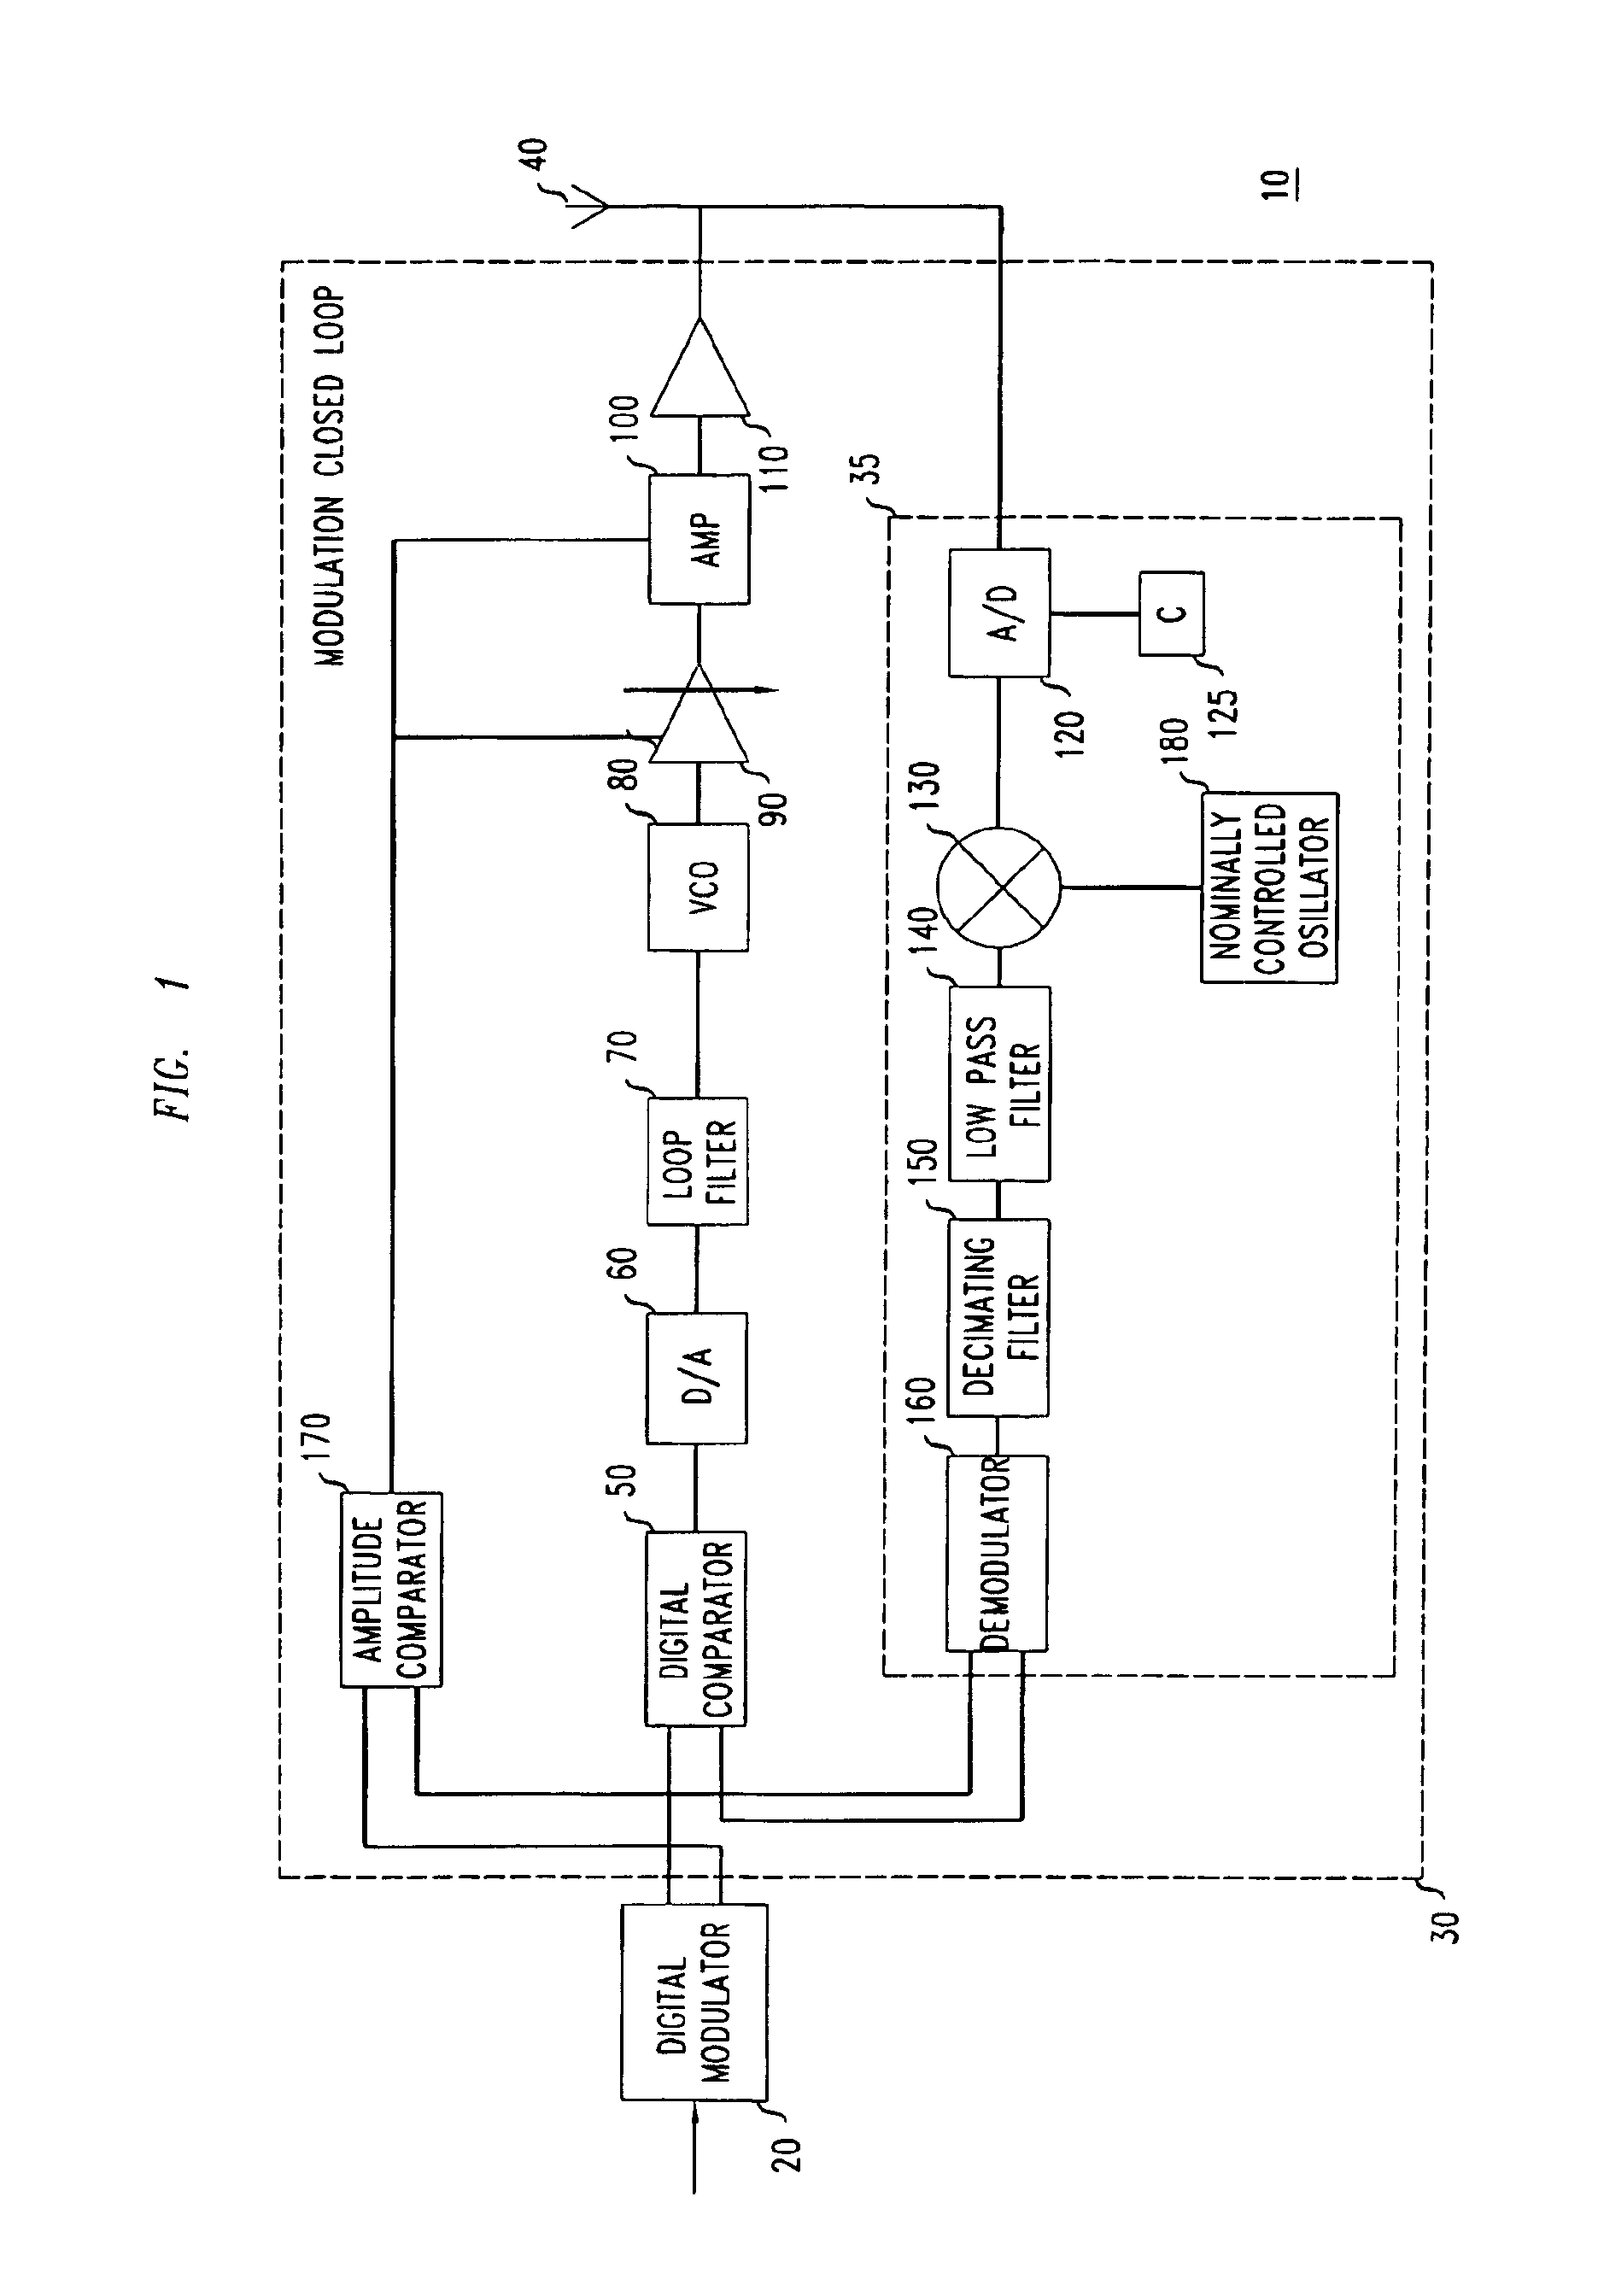 Transmitter device having a modulation closed loop